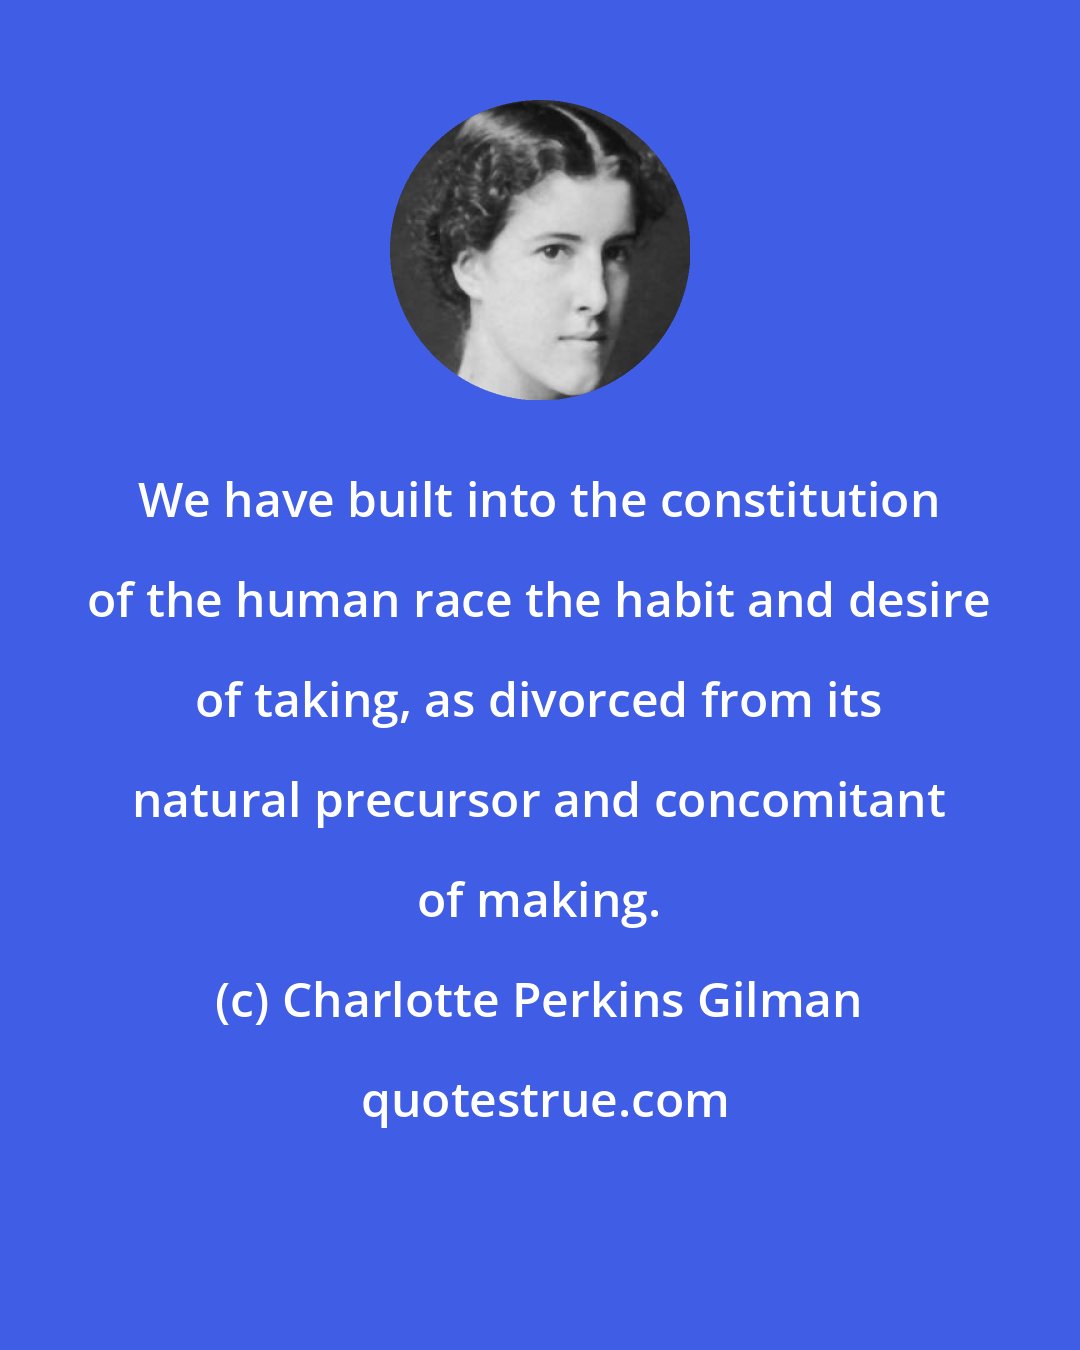 Charlotte Perkins Gilman: We have built into the constitution of the human race the habit and desire of taking, as divorced from its natural precursor and concomitant of making.